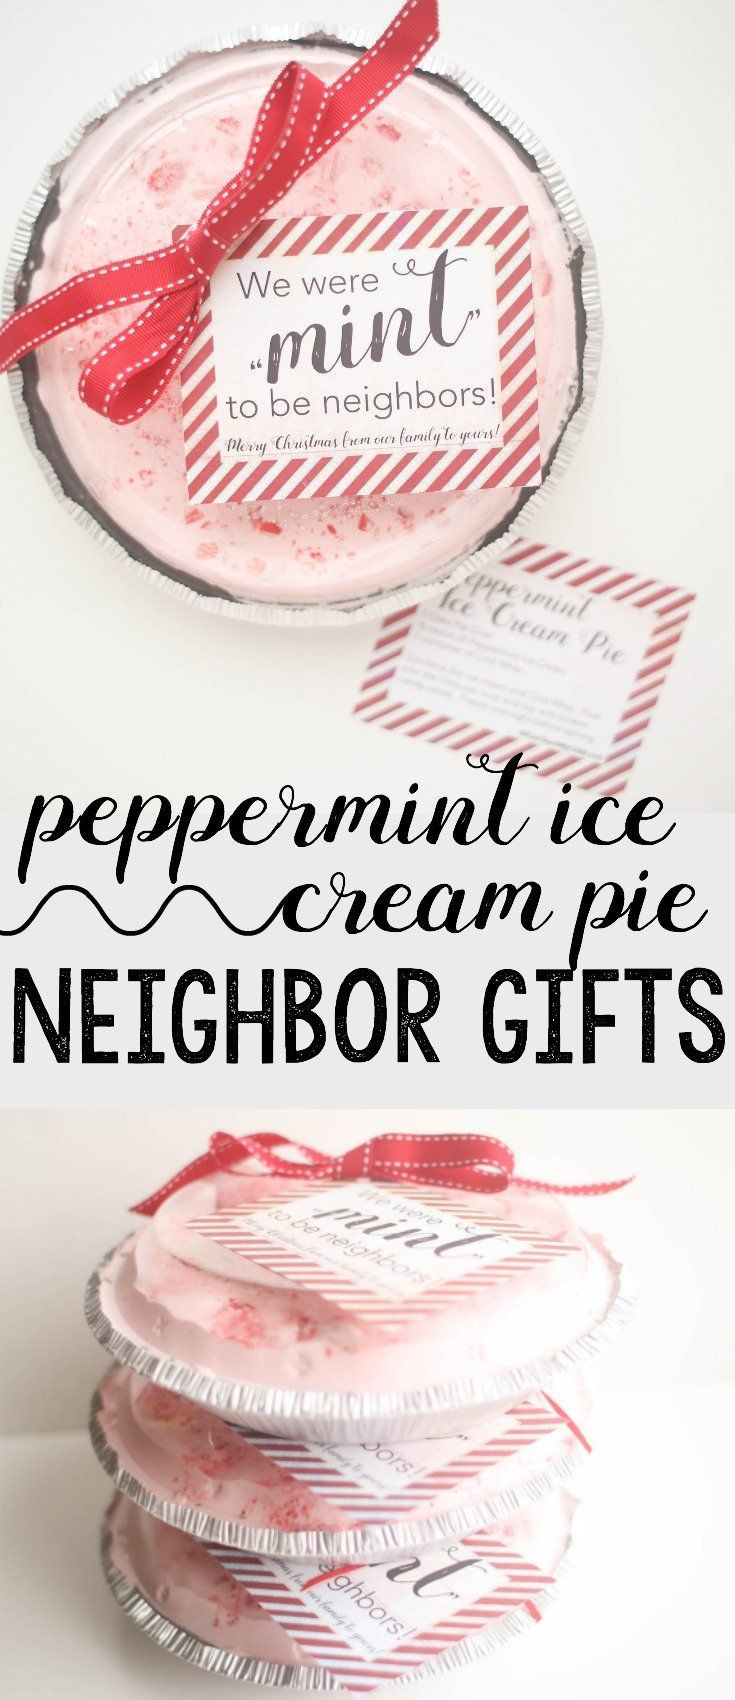 Where Can I Get Free Christmas Gifts For My Child
 Neighbor Gift Peppermint Ice Cream Pie with Free